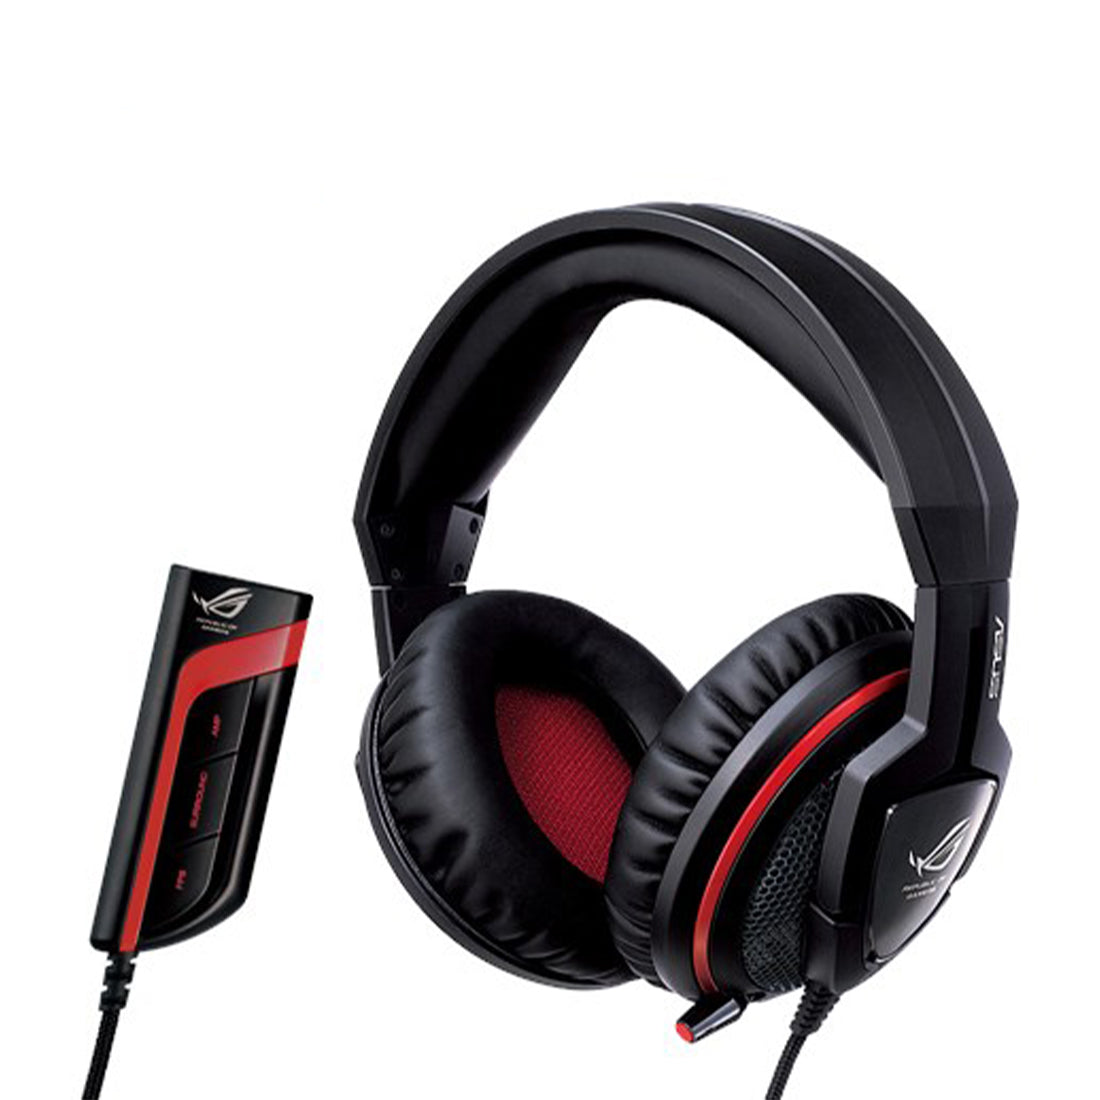 Asus Orion Pro ROG Gaming Headset with Spitfire USB